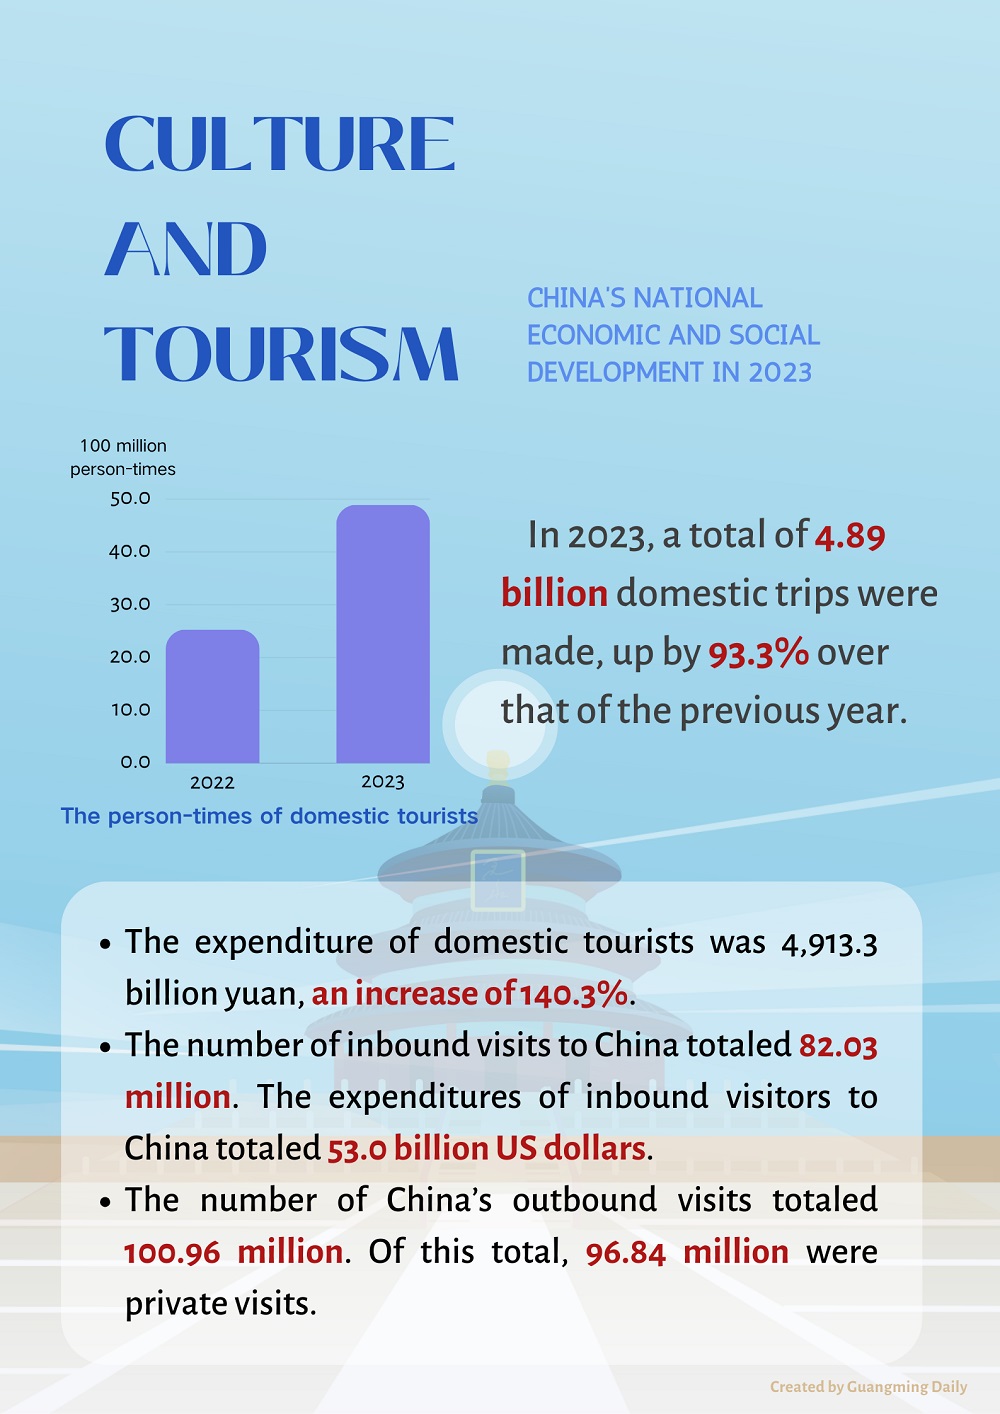 China's National Economic and Social Development in 2023: Culture and Tourism